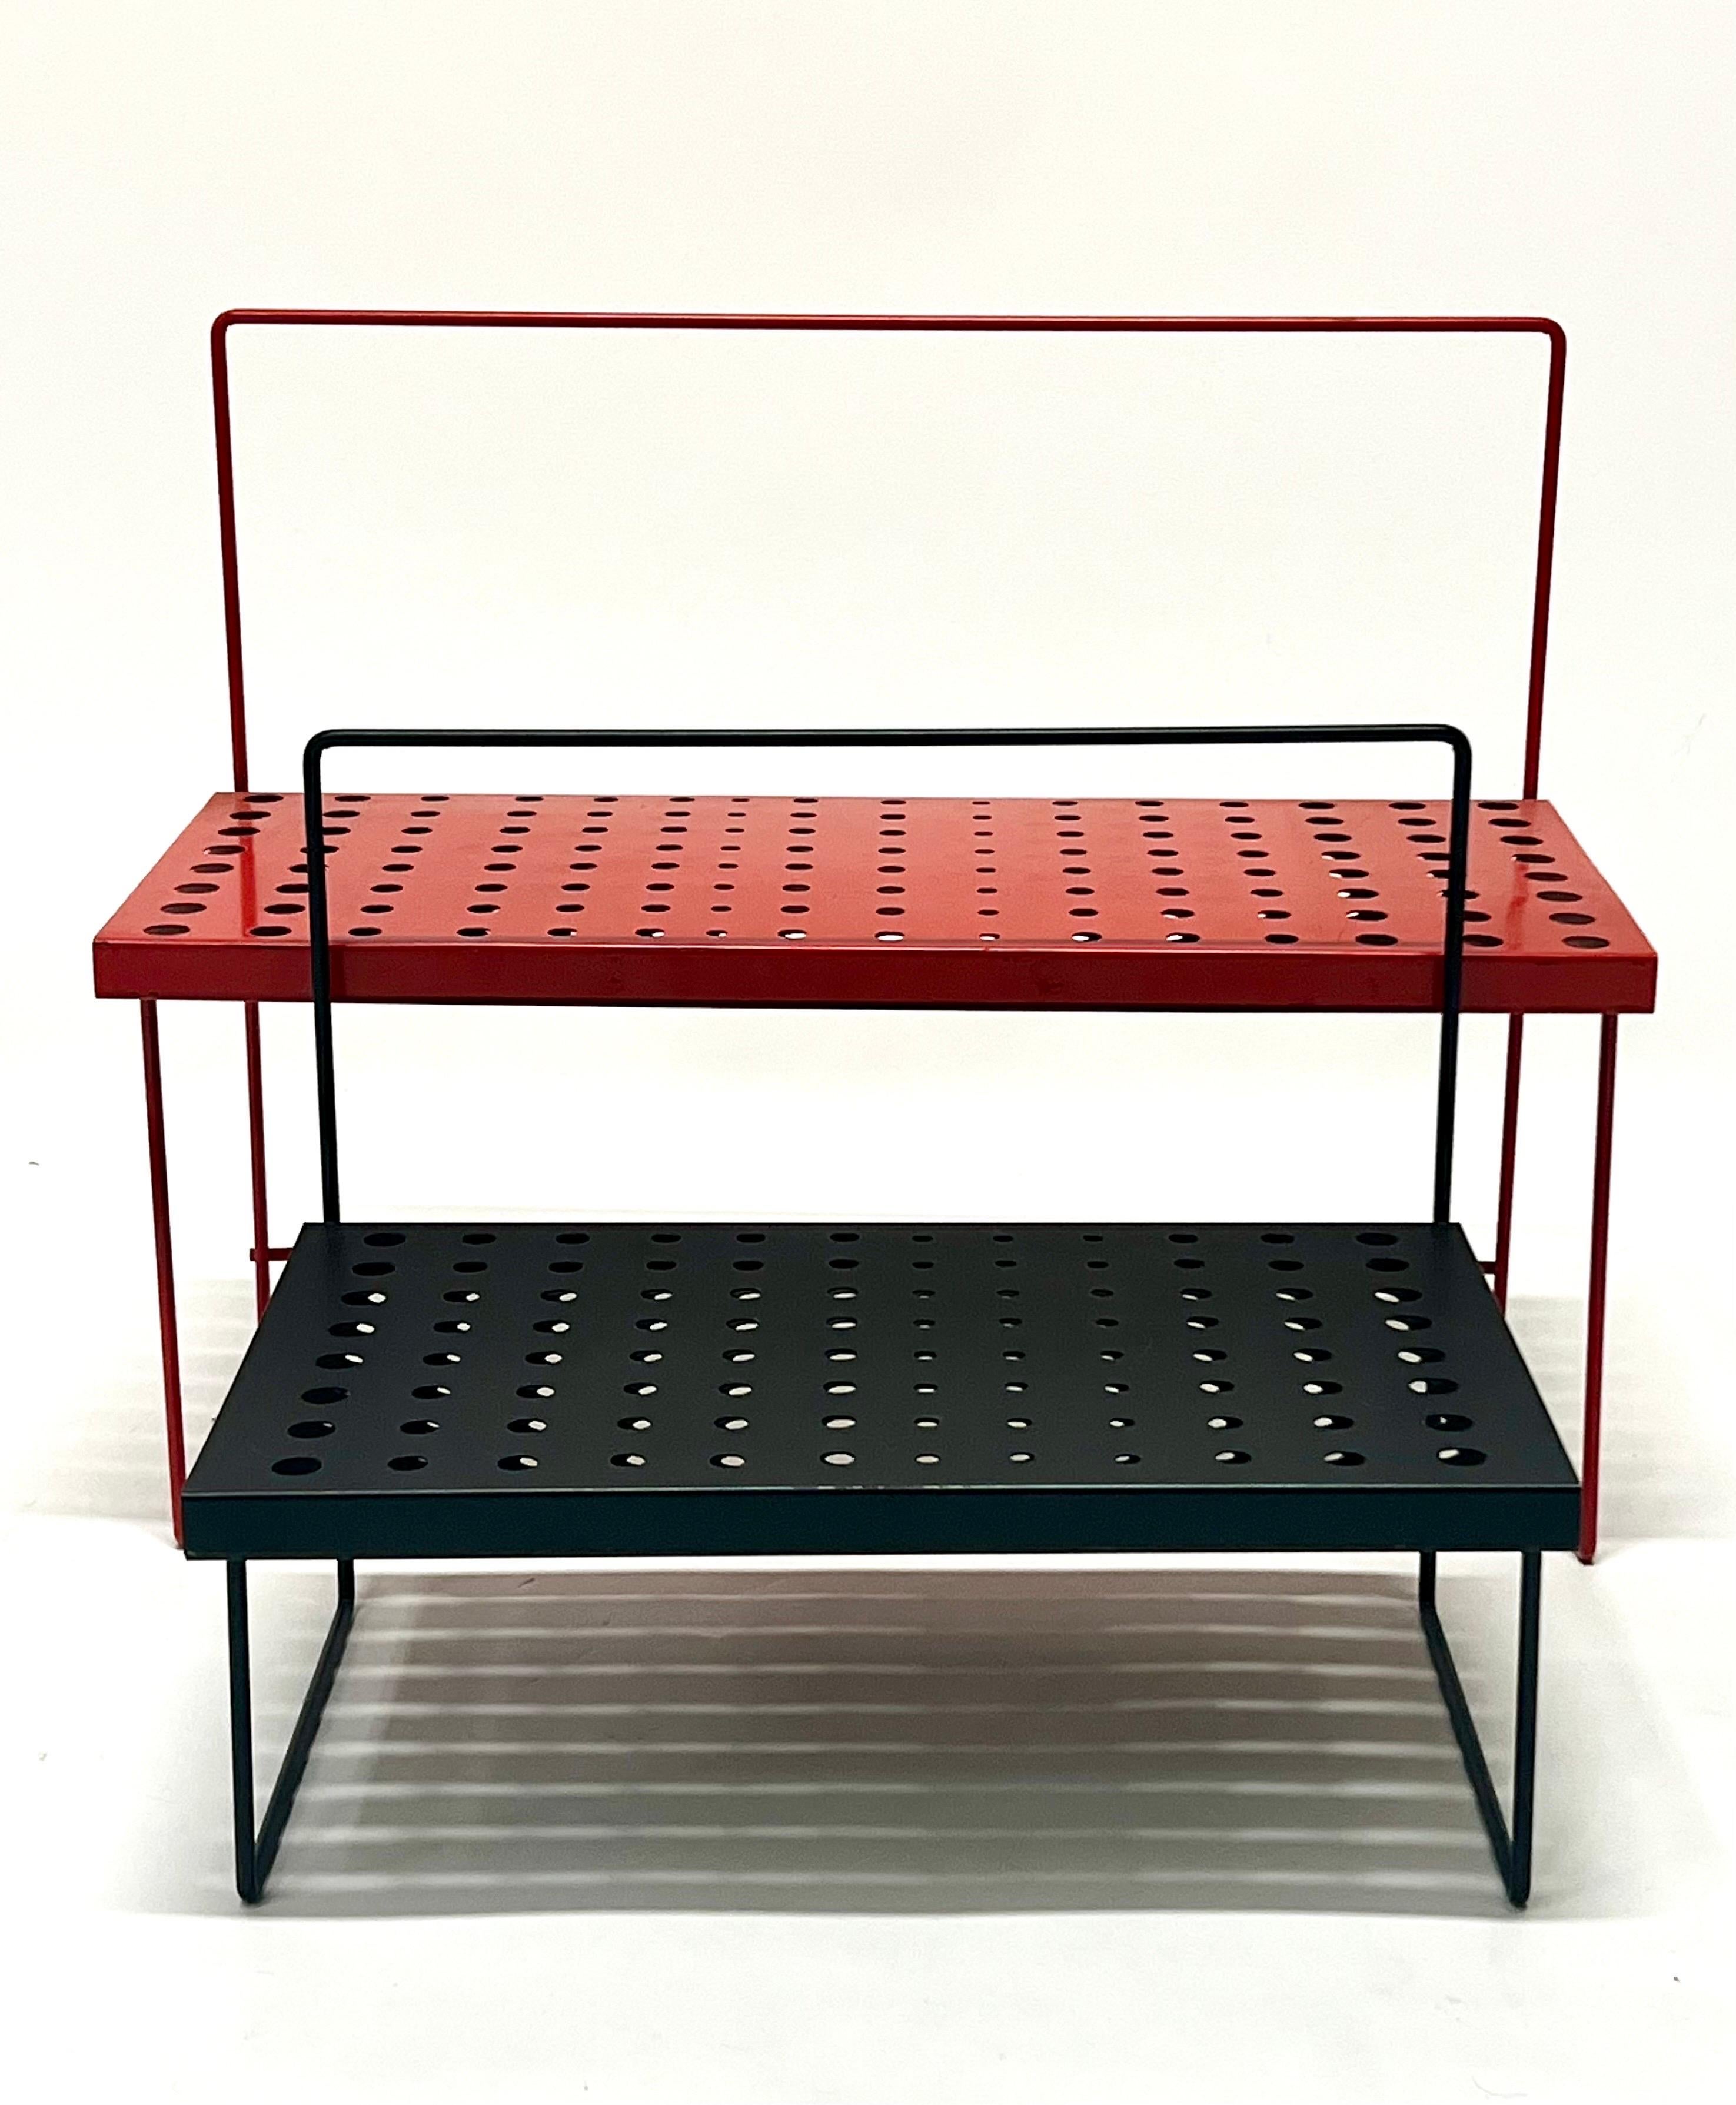 Vintage French Modern Perforated Metal Plant Stands, c1960s For Sale 3